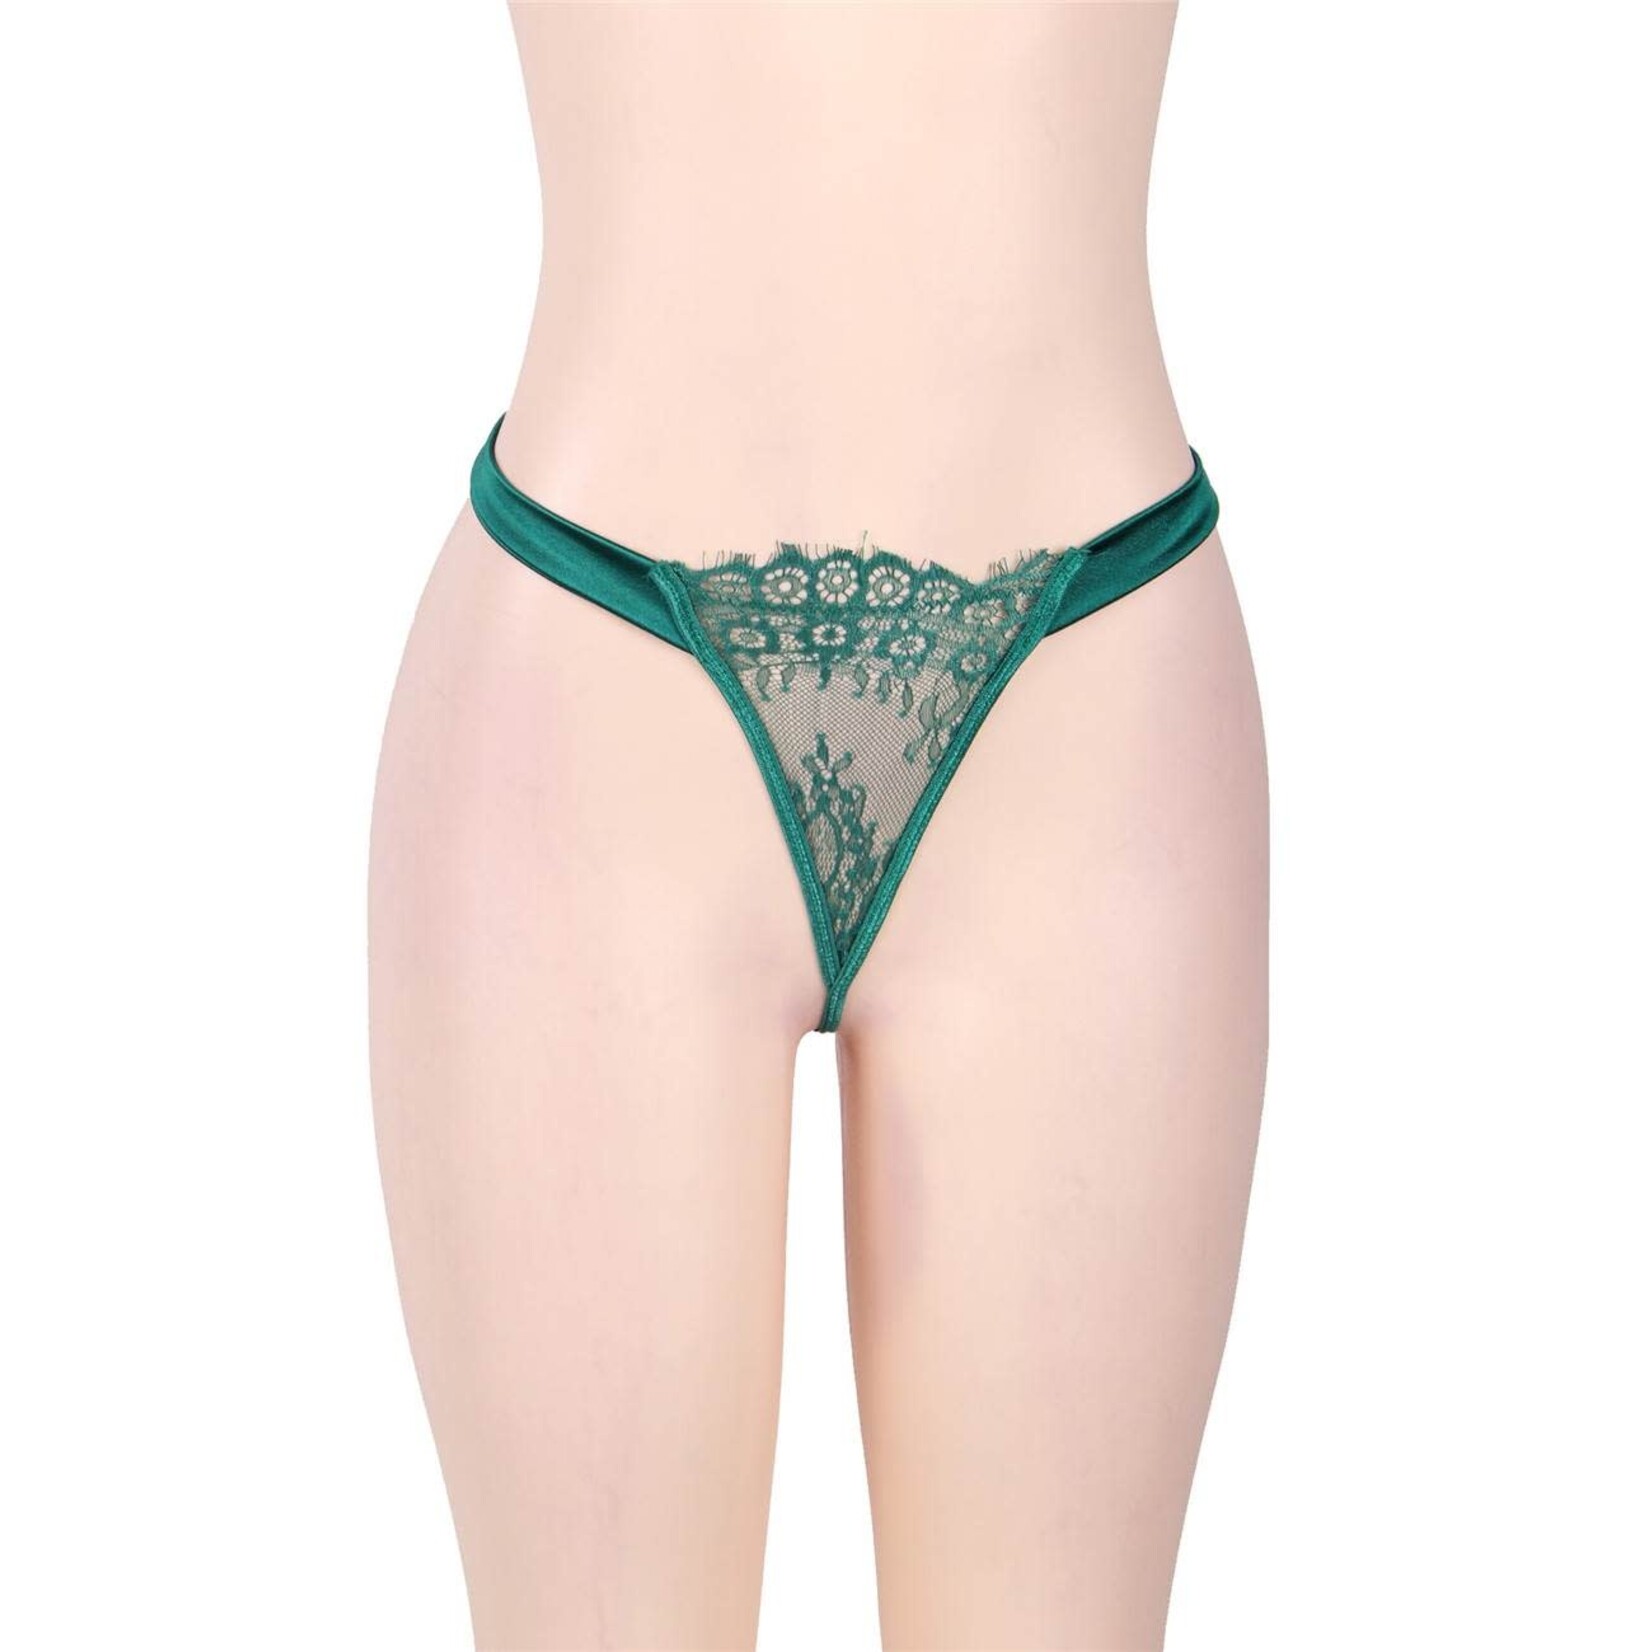 OH YEAH! -  ELEGANT EYELASH LACE PLUS SIZE GARTER GREEN LINGERIE WITH UNDERWIRE XL-2XL